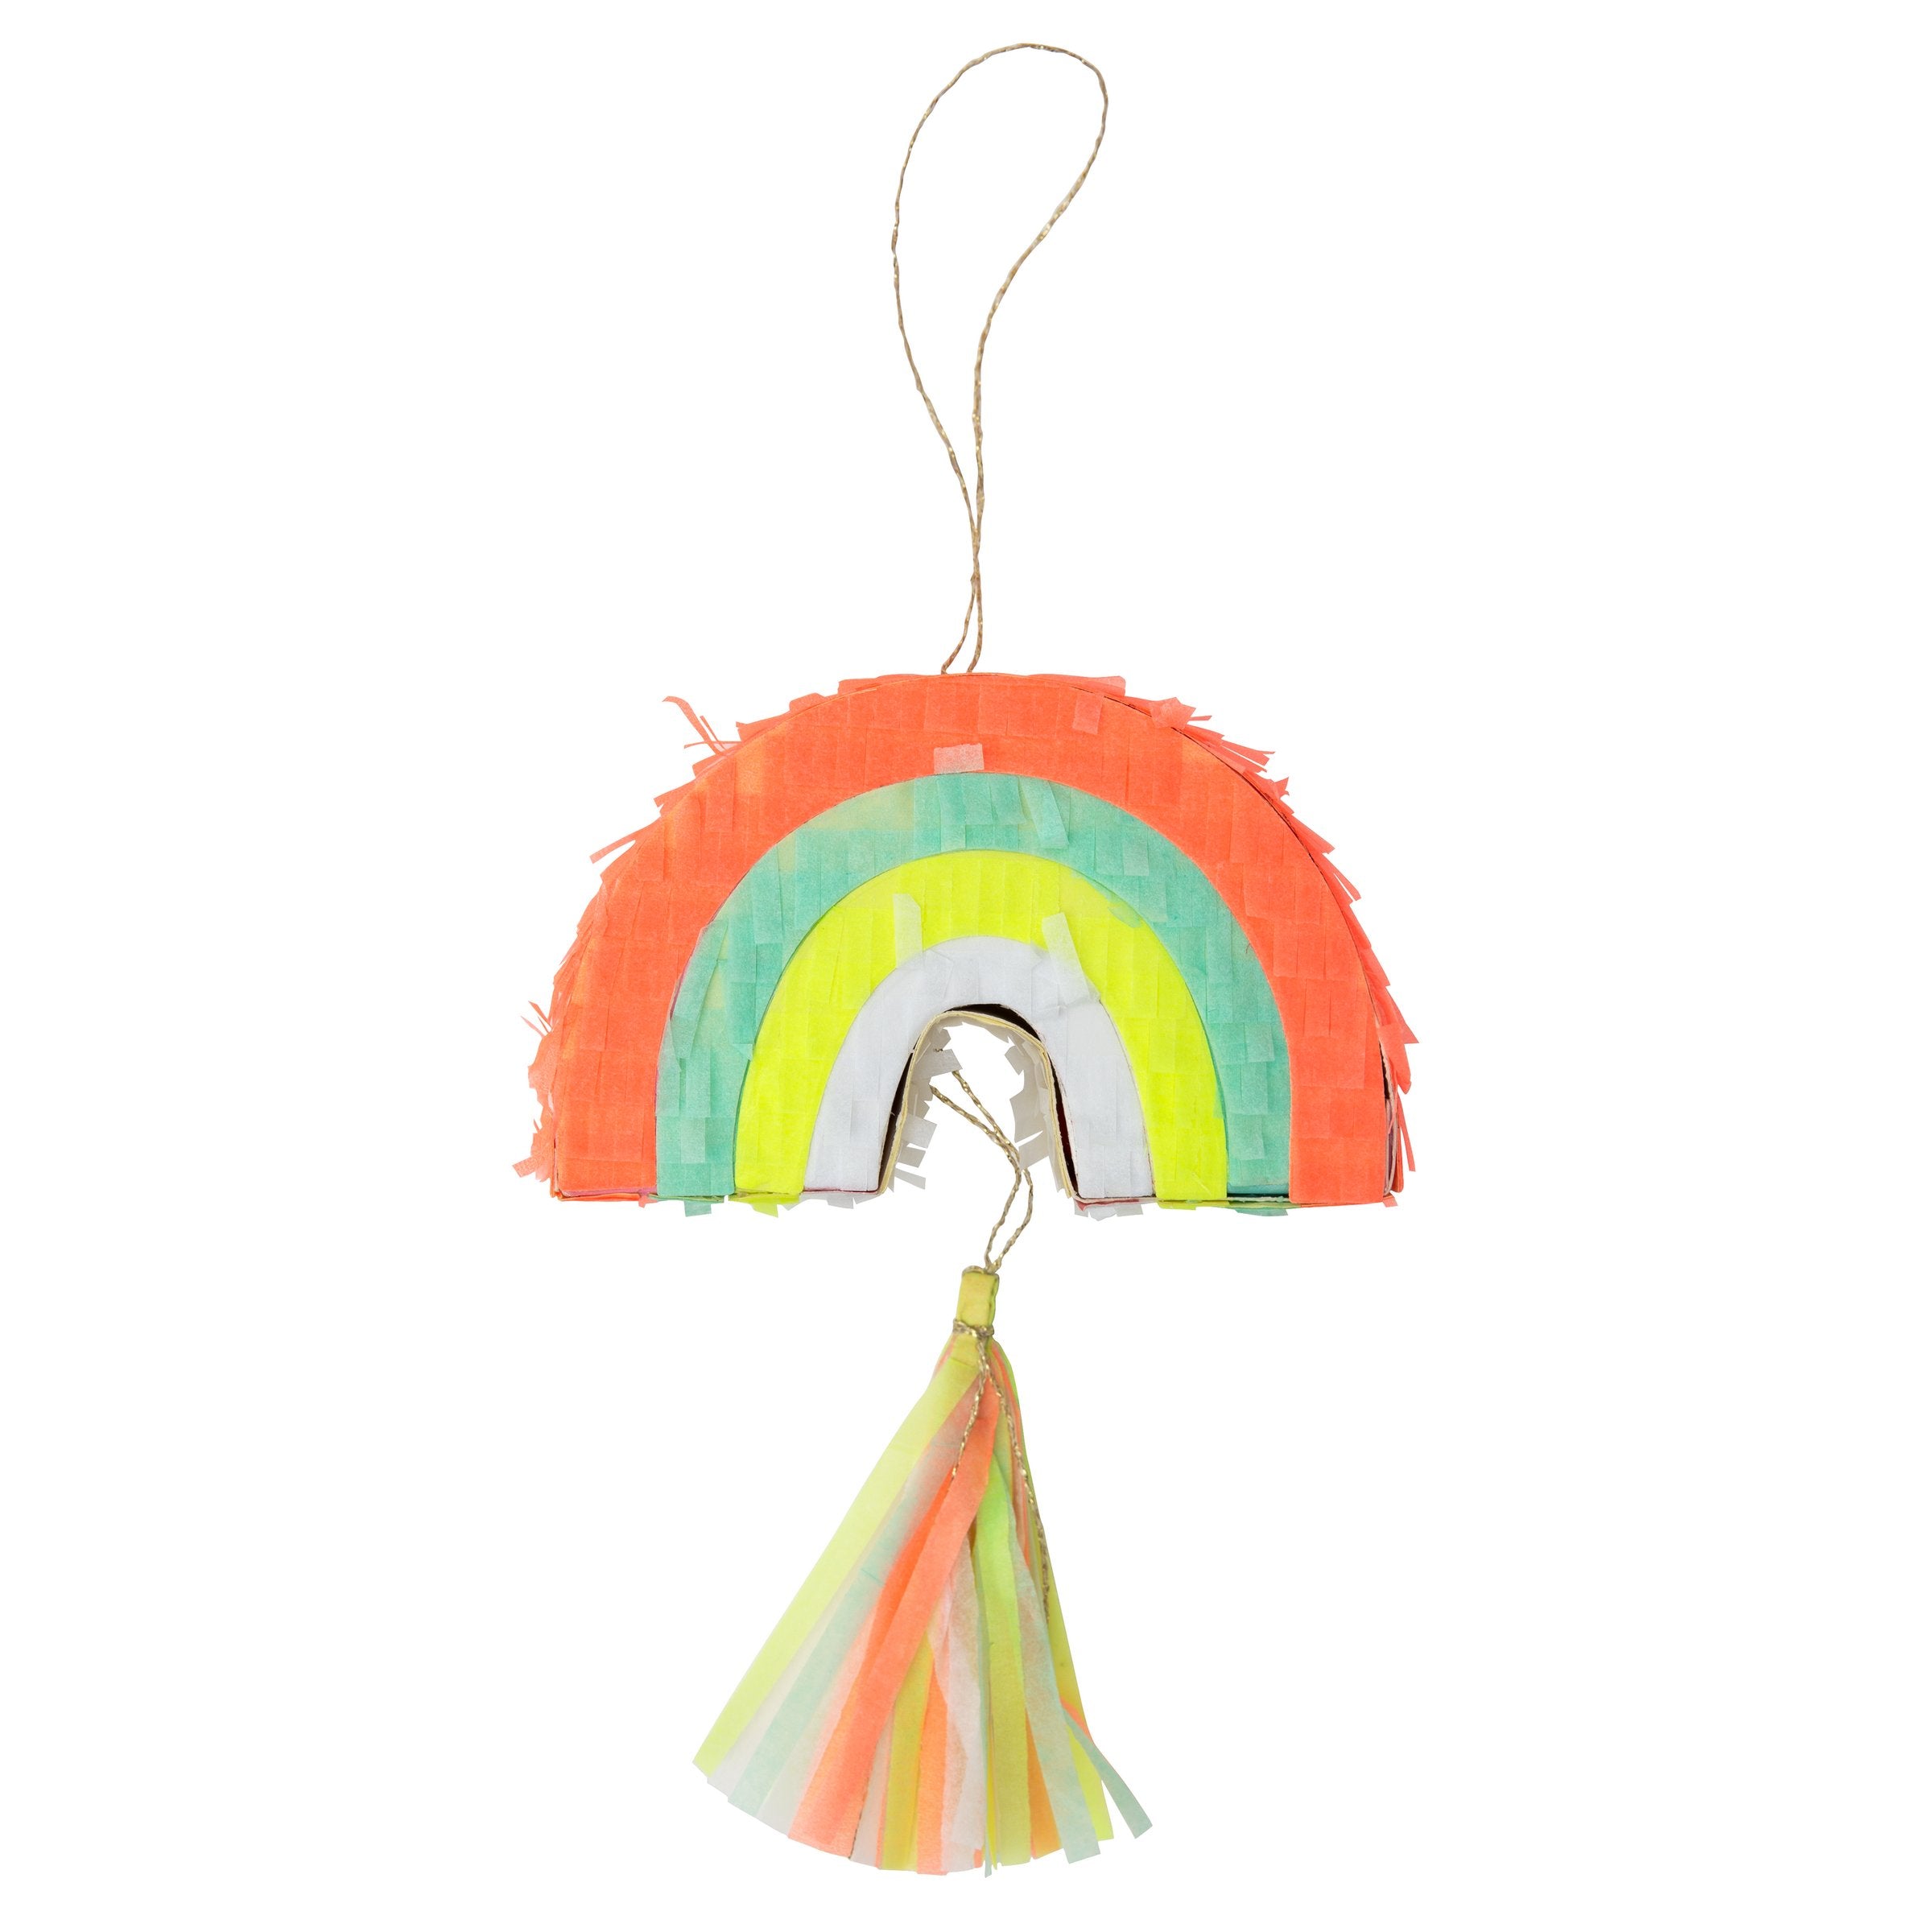 These mini pinatas, in the shape of a rainbow with a neon tassel, are filled with colorful confetti and temporary tattoos.